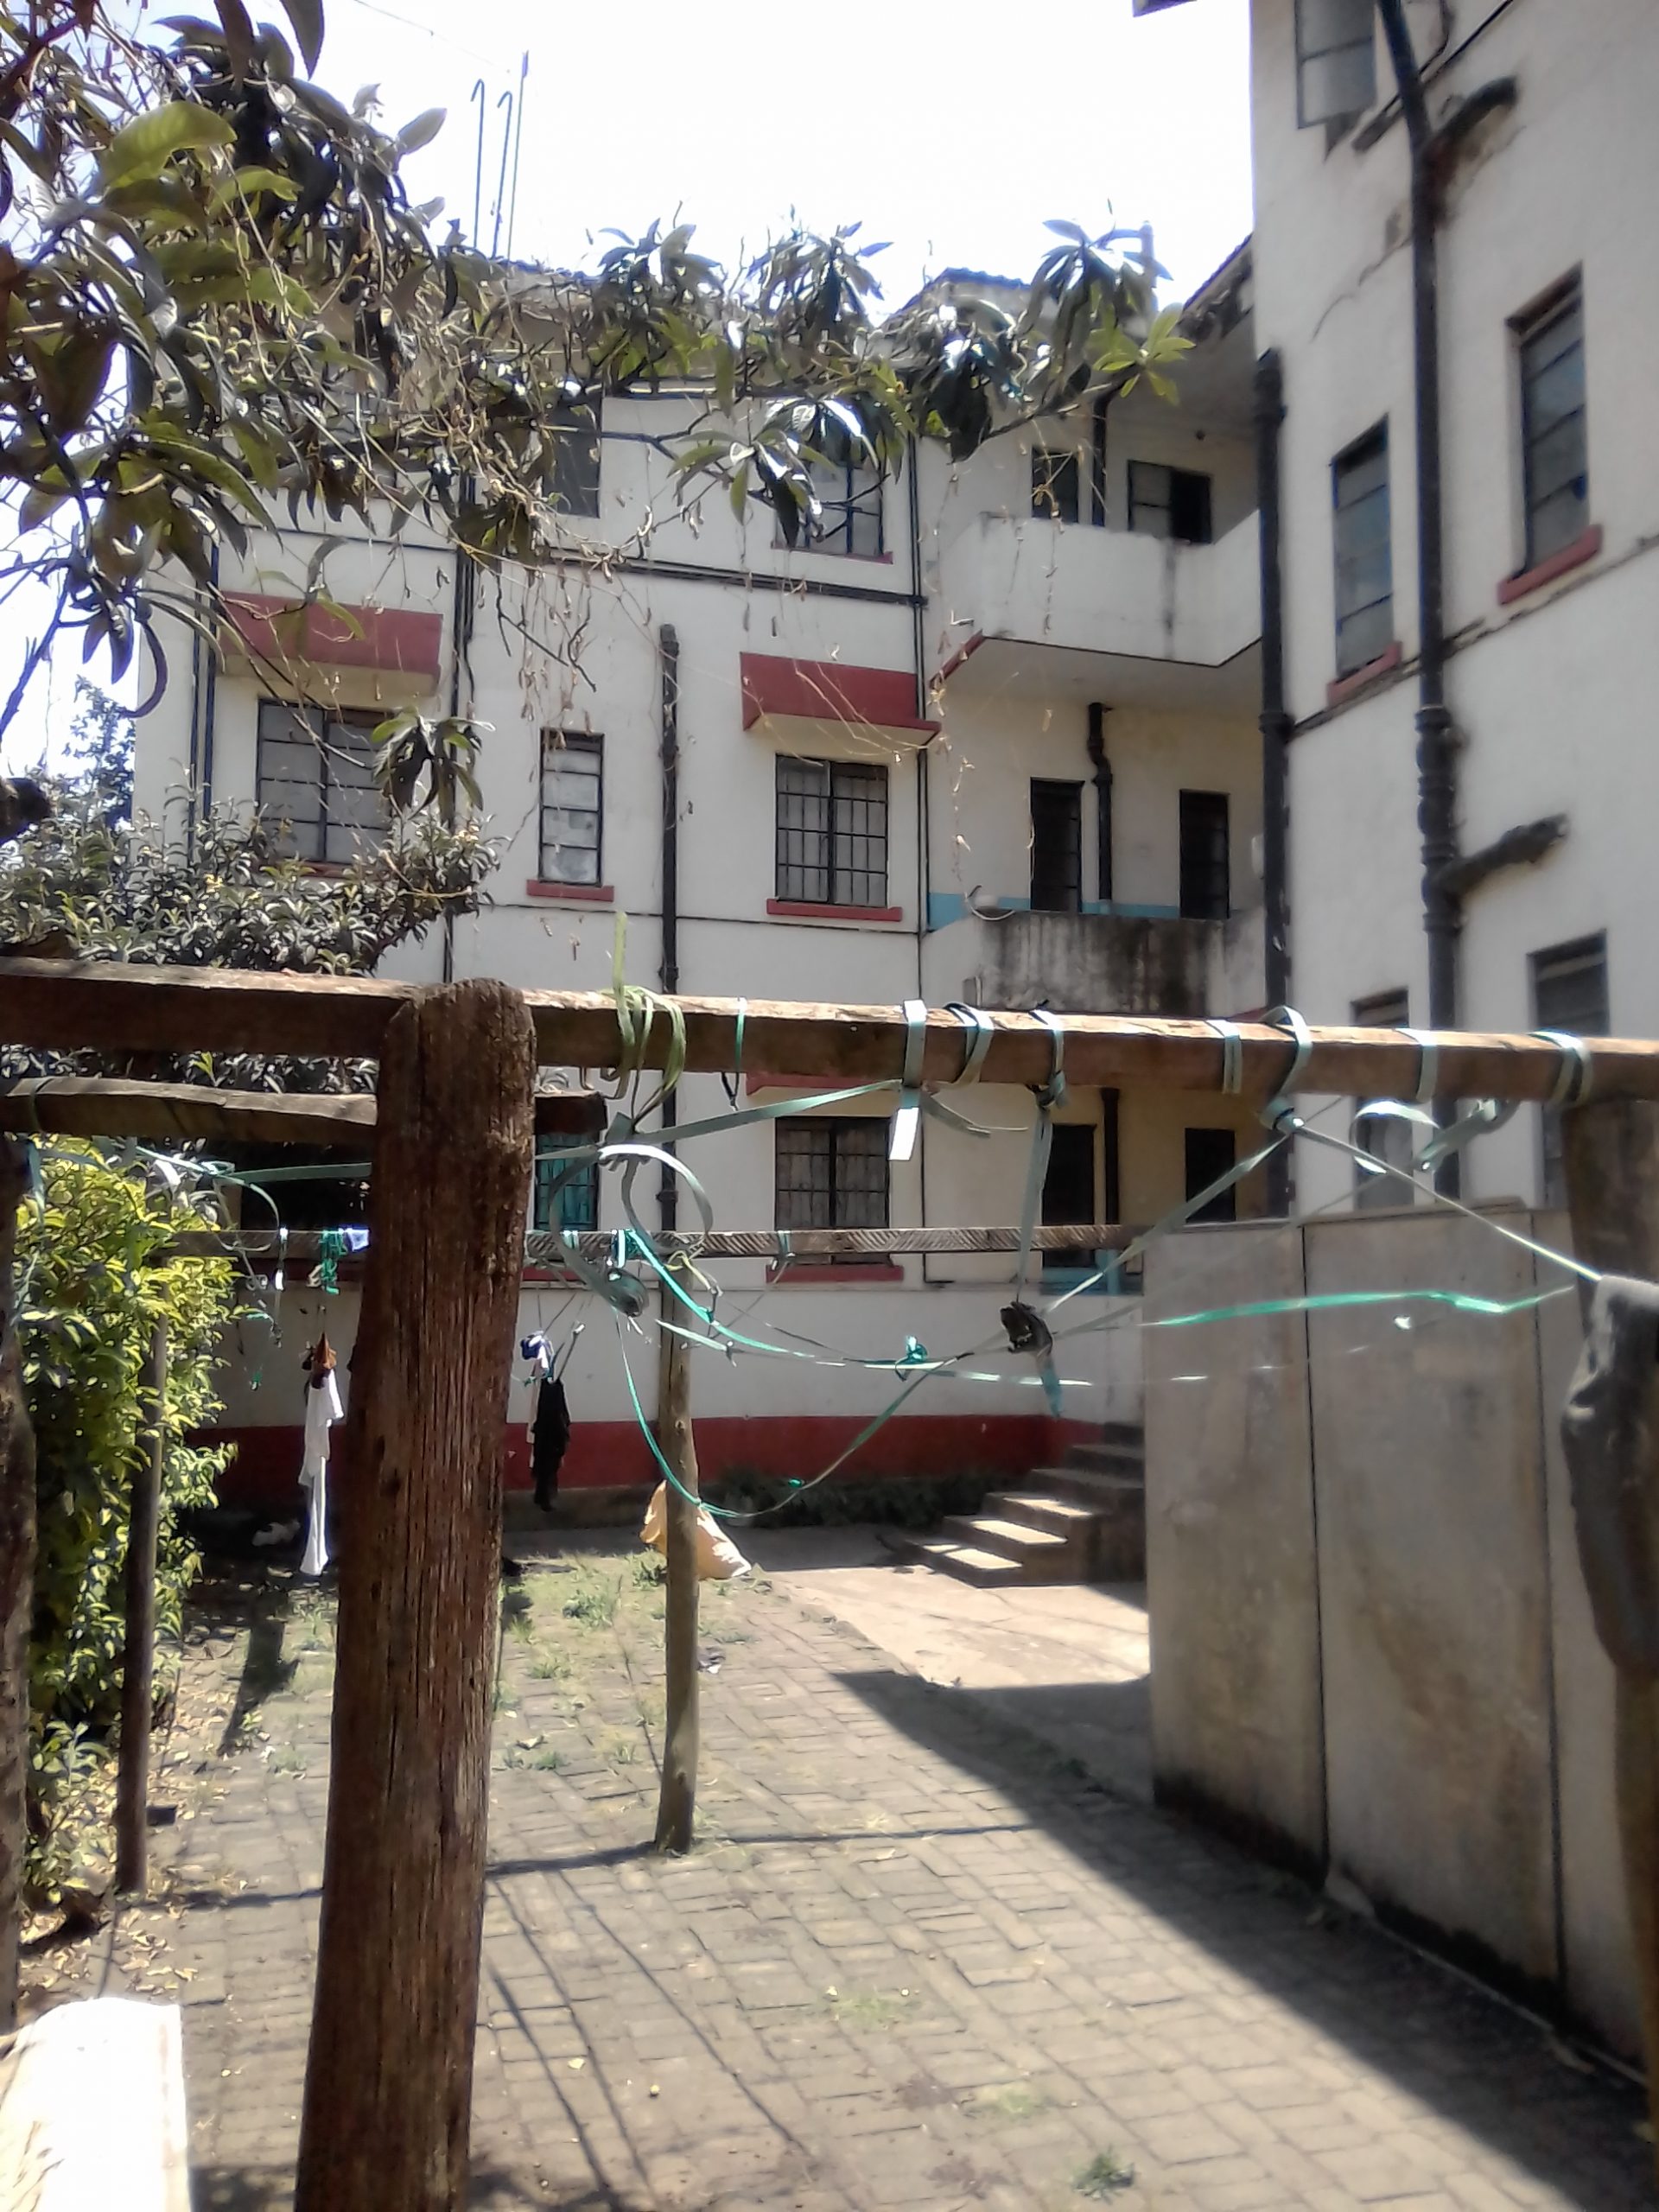 Nairobi West 120 Bed Hostel Buy at 80M or Rent at 600k per month